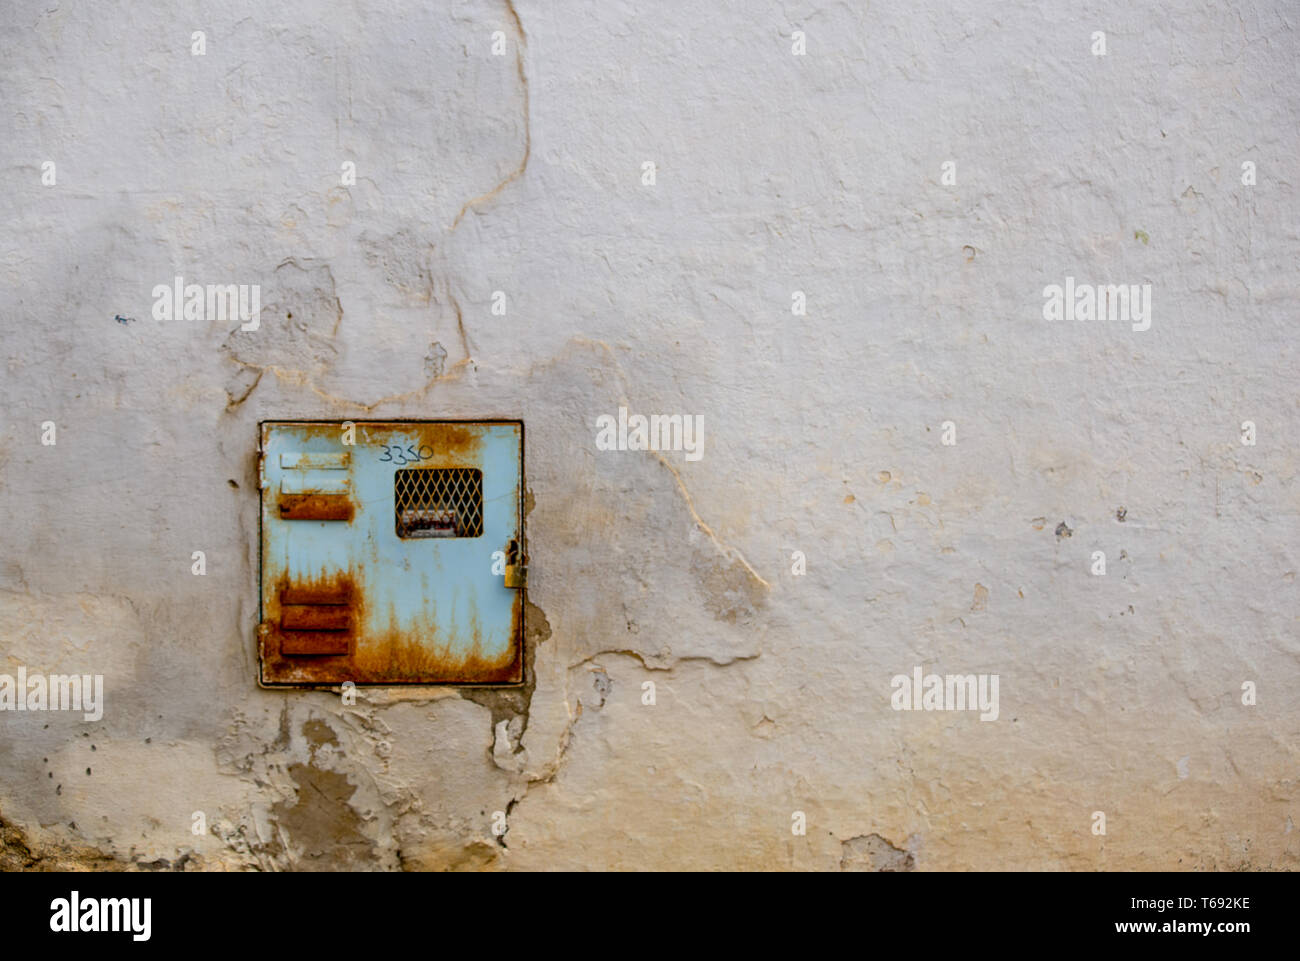 An old and rusty electricity meter fits perfectly in a very deteriorated wall of one street of the colonial town of Villa de Leyva, Colombia. Stock Photo